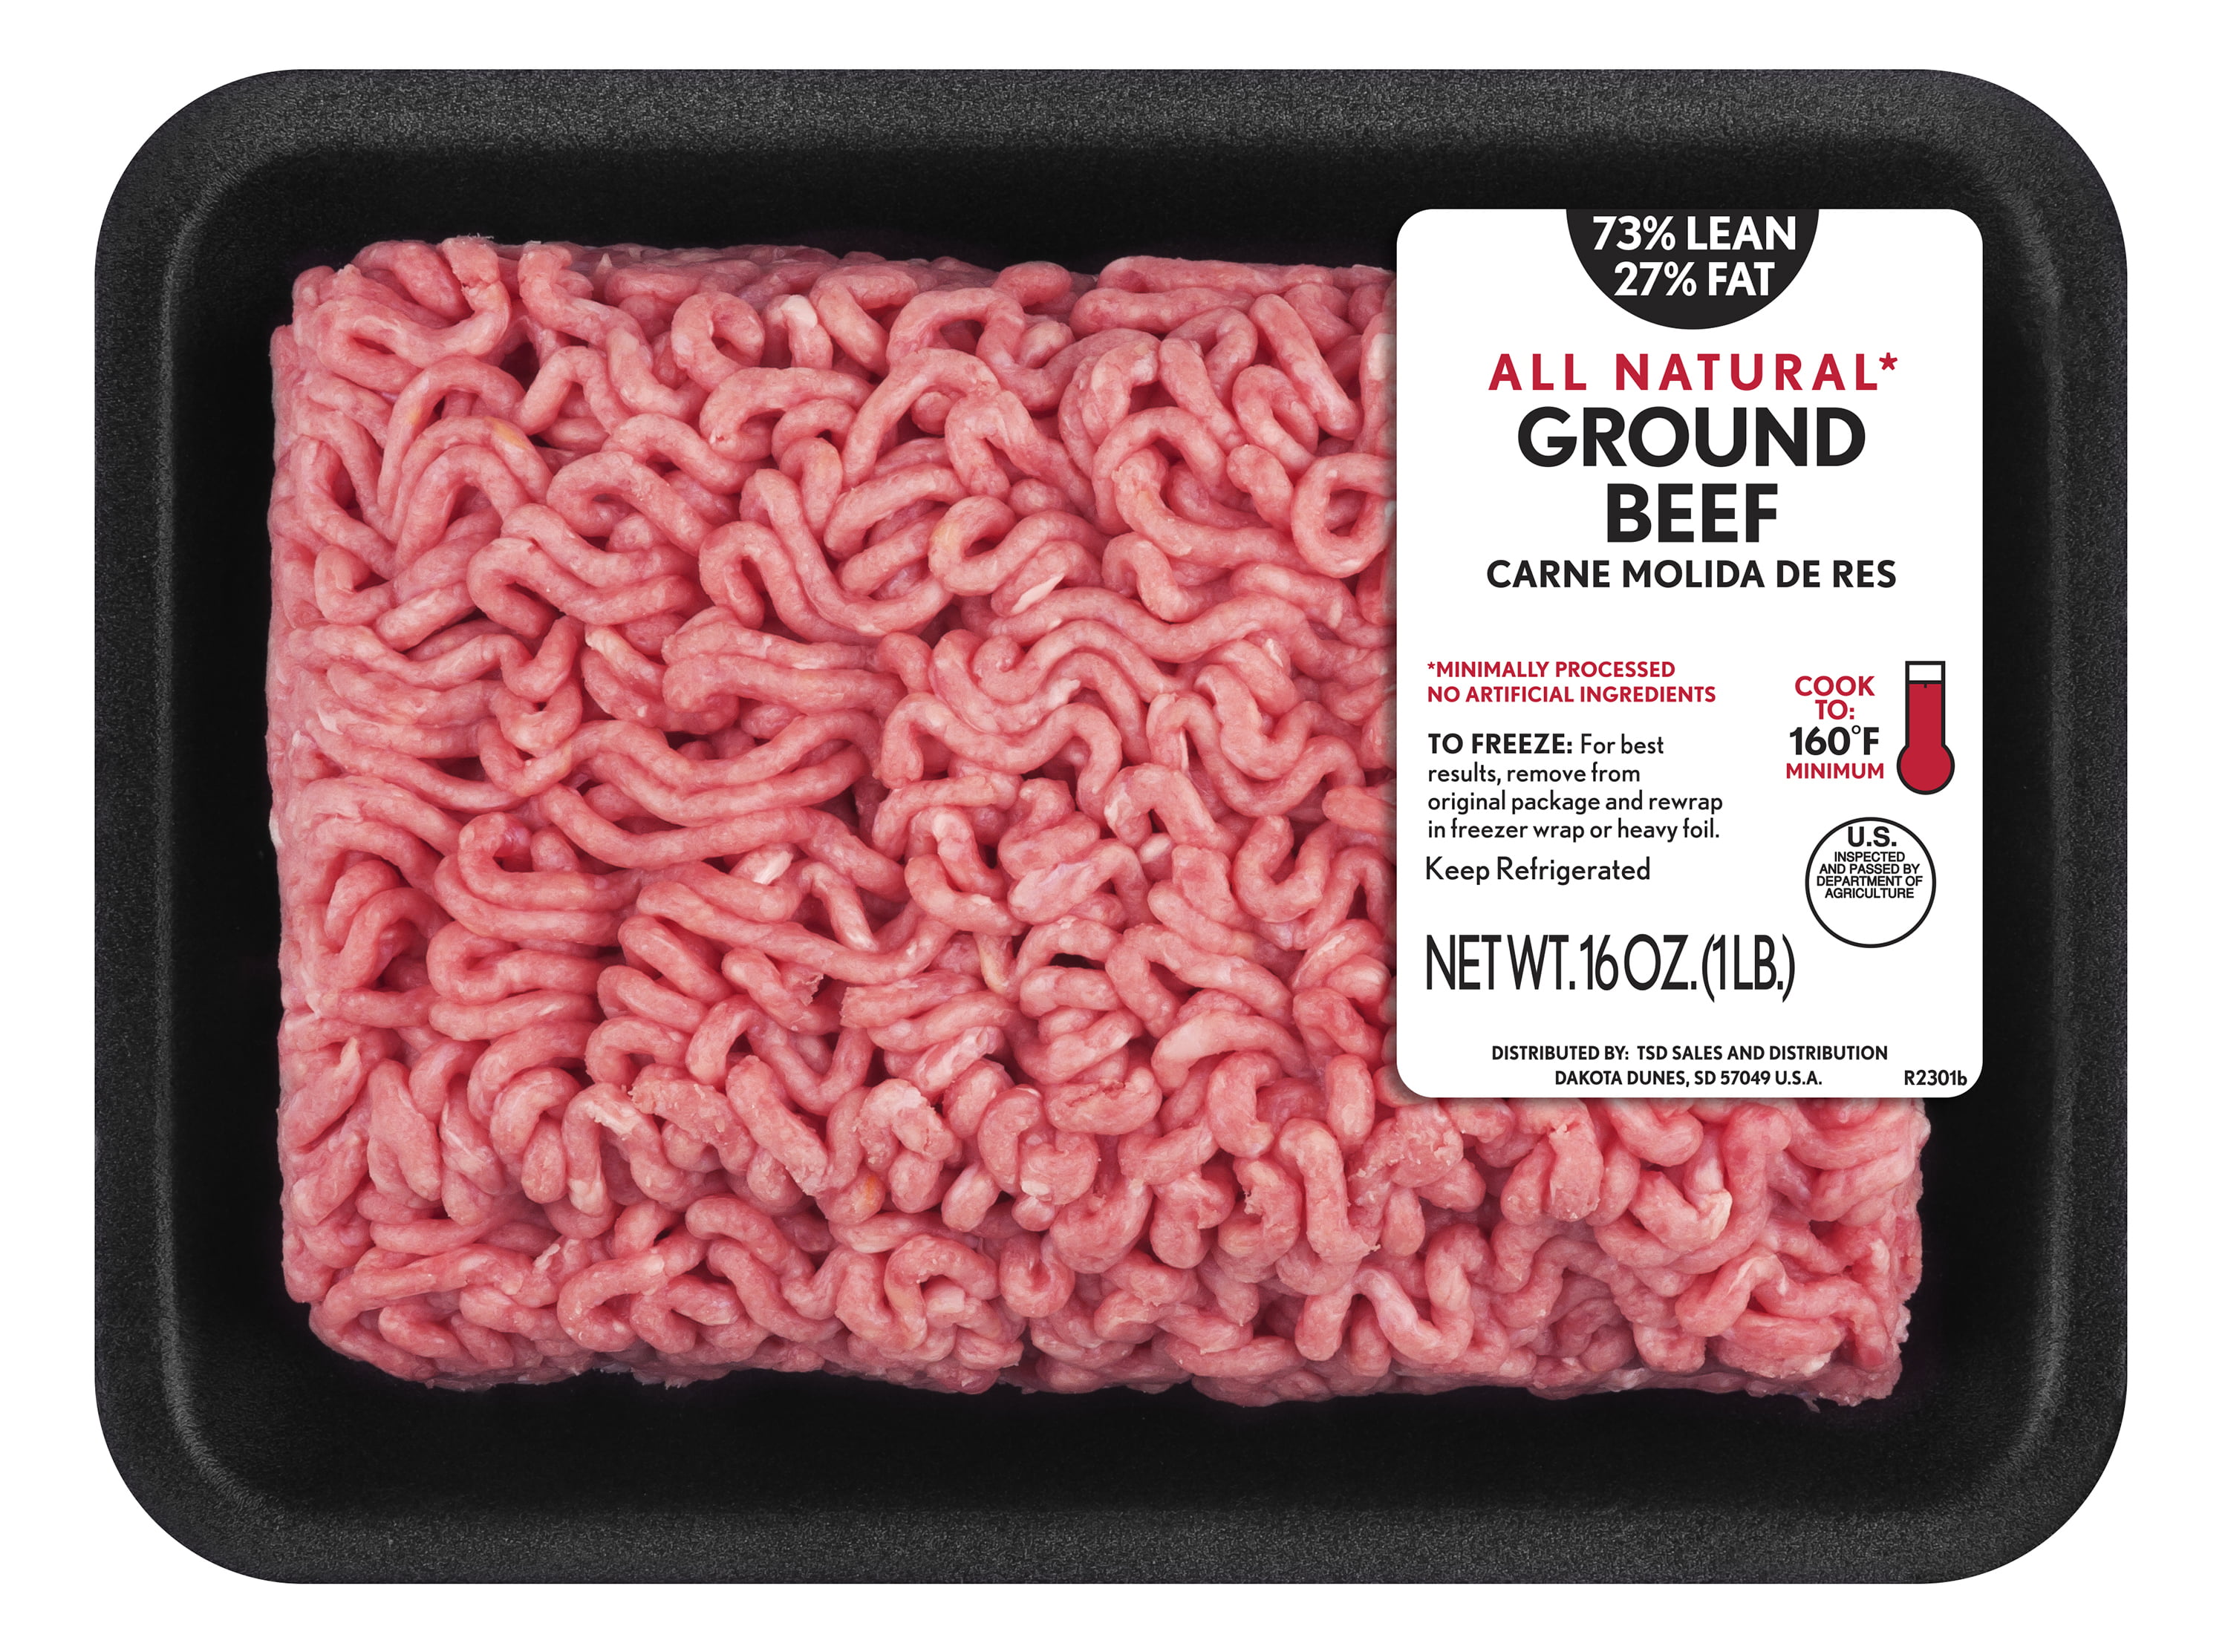 All Natural* 73 Lean/27 Fat Ground Beef Tray, 1 lb